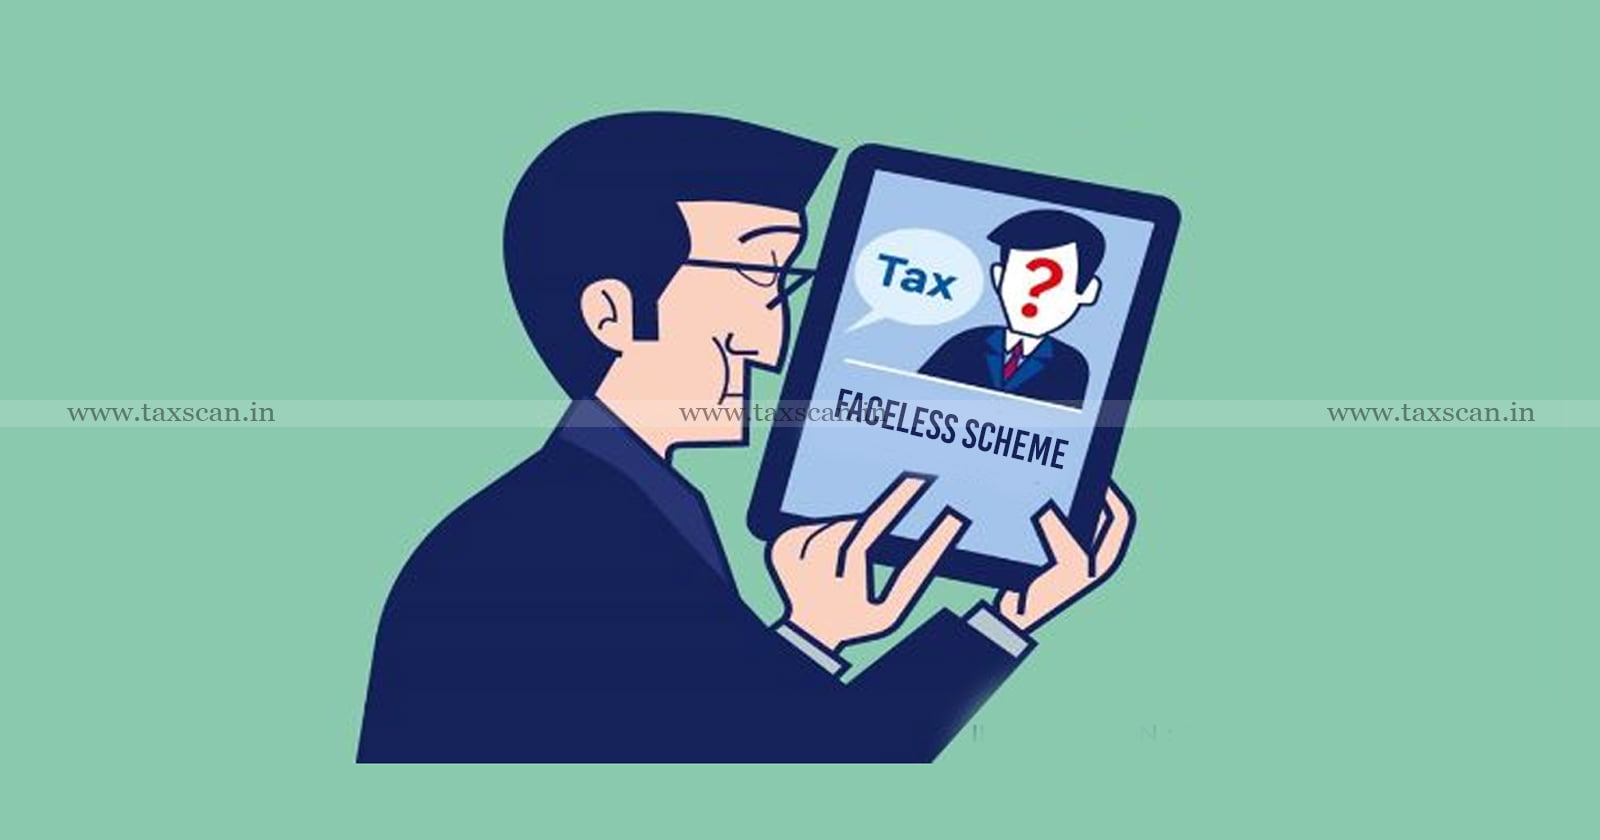 Experts - Experts Push for Re-evaluation of Faceless Tax Audit Scheme - Faceless Tax Audit Scheme - taxscan